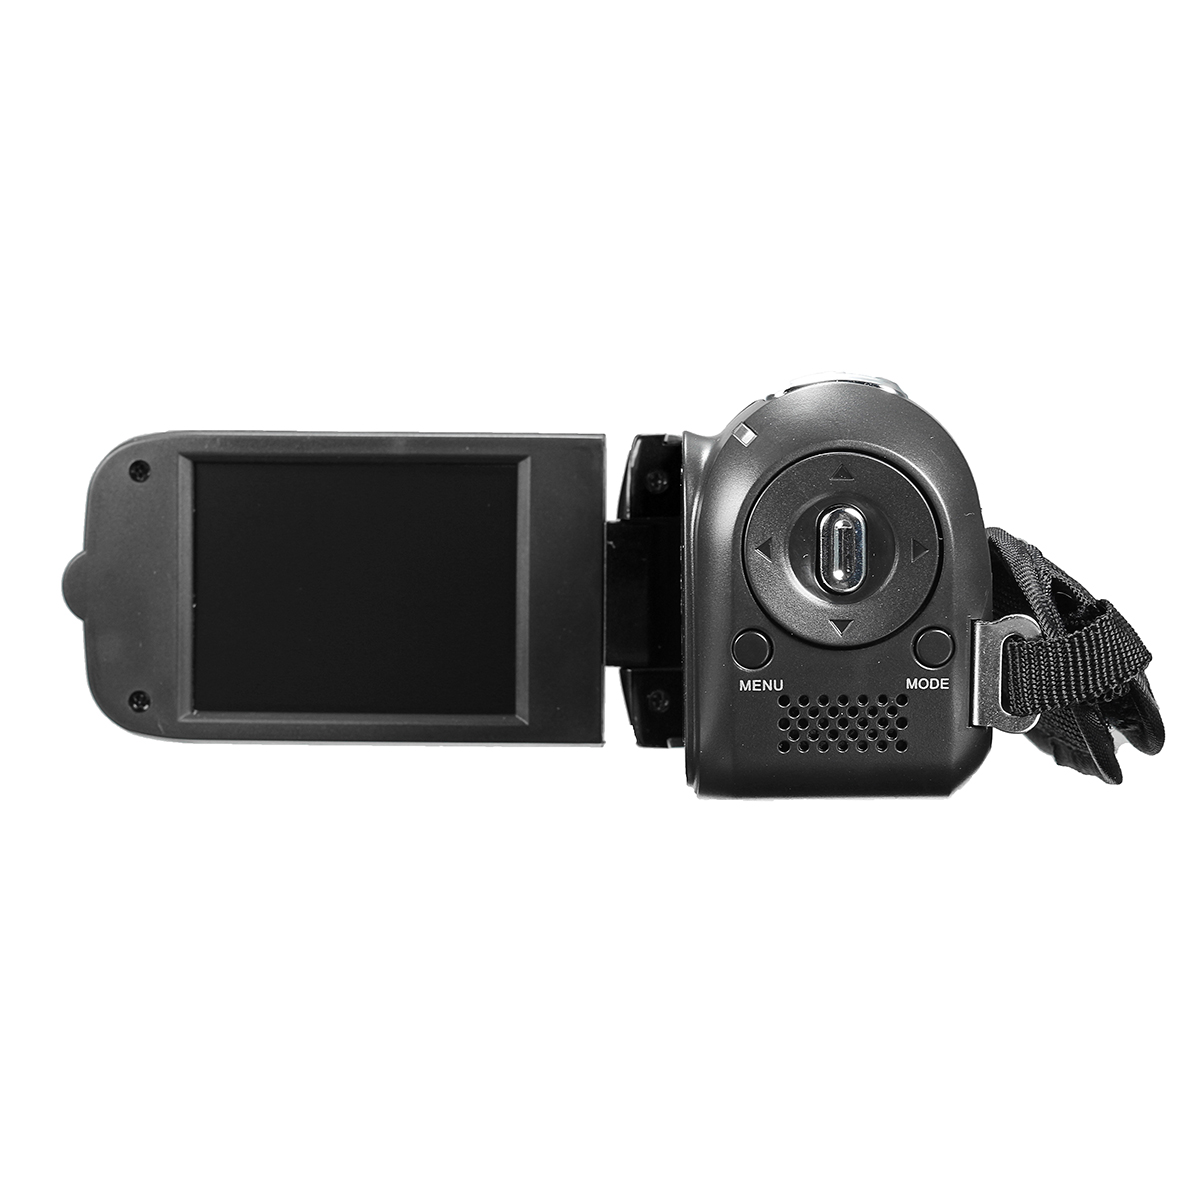 16MP-16X-Zoom-27-Inch-HD-1080P-LCD-Digital-Video-Camera-Camcorder-DV-Touch-Screen-1181570